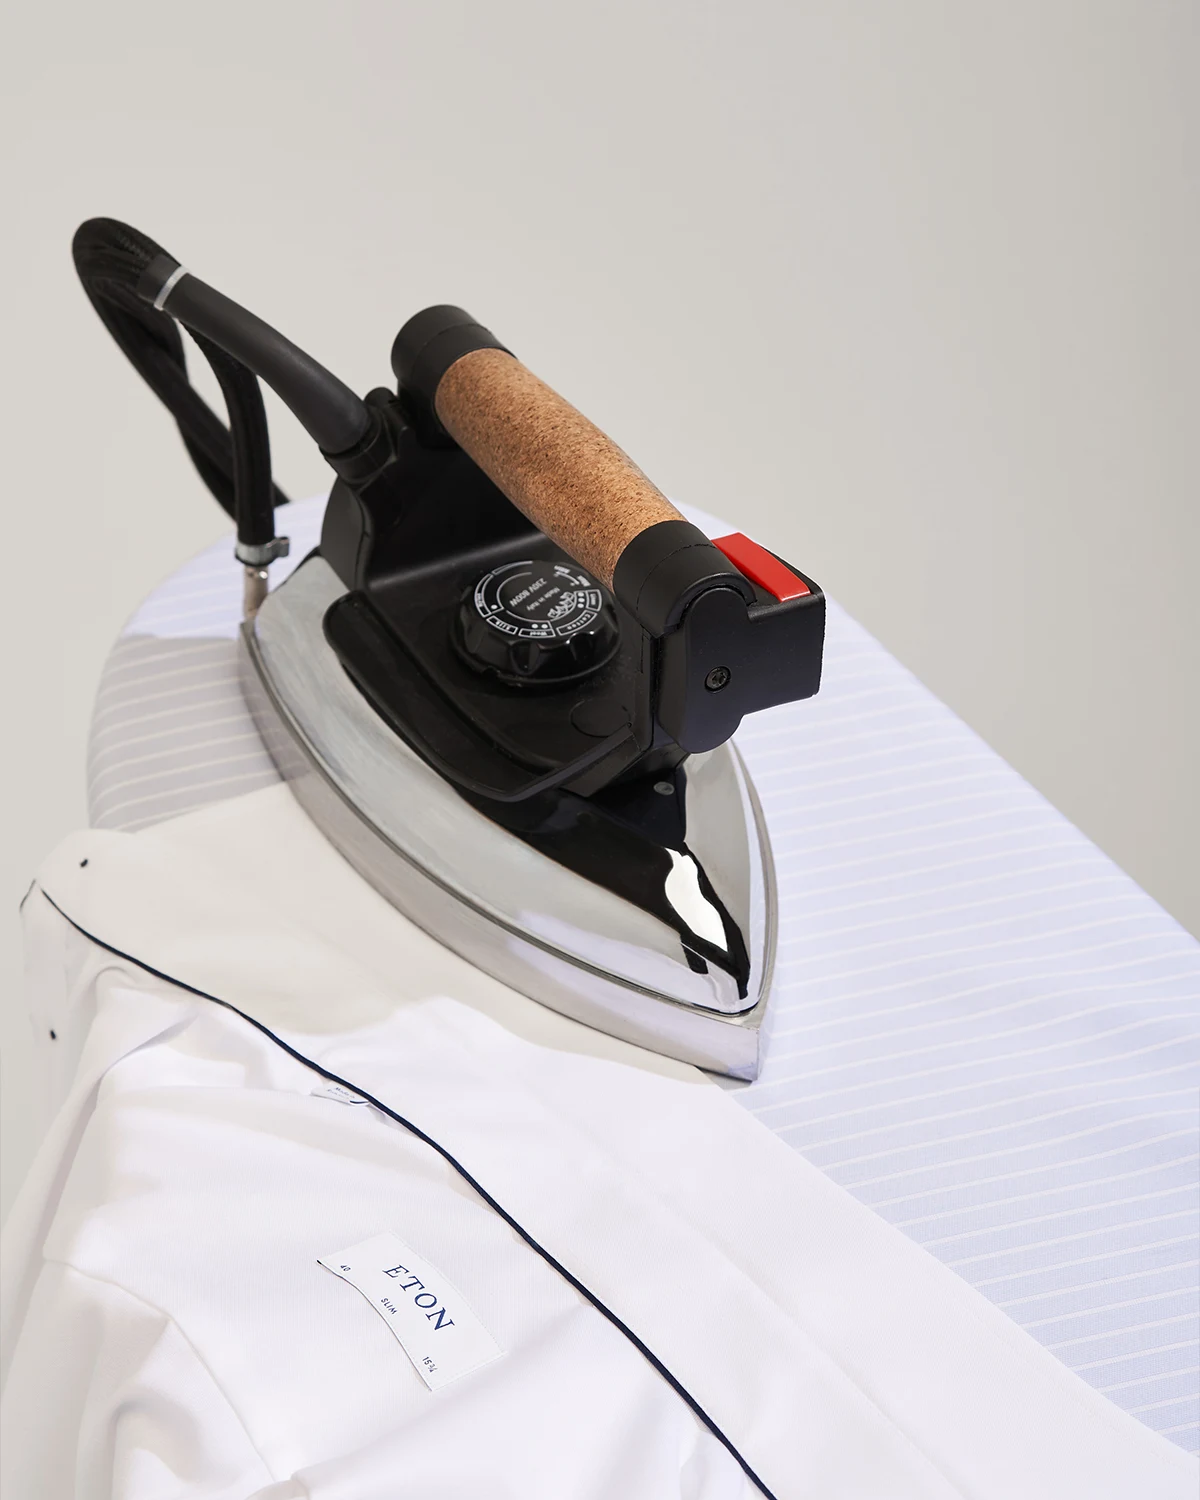 How to iron a Dress Shirt - Step by step - Eton